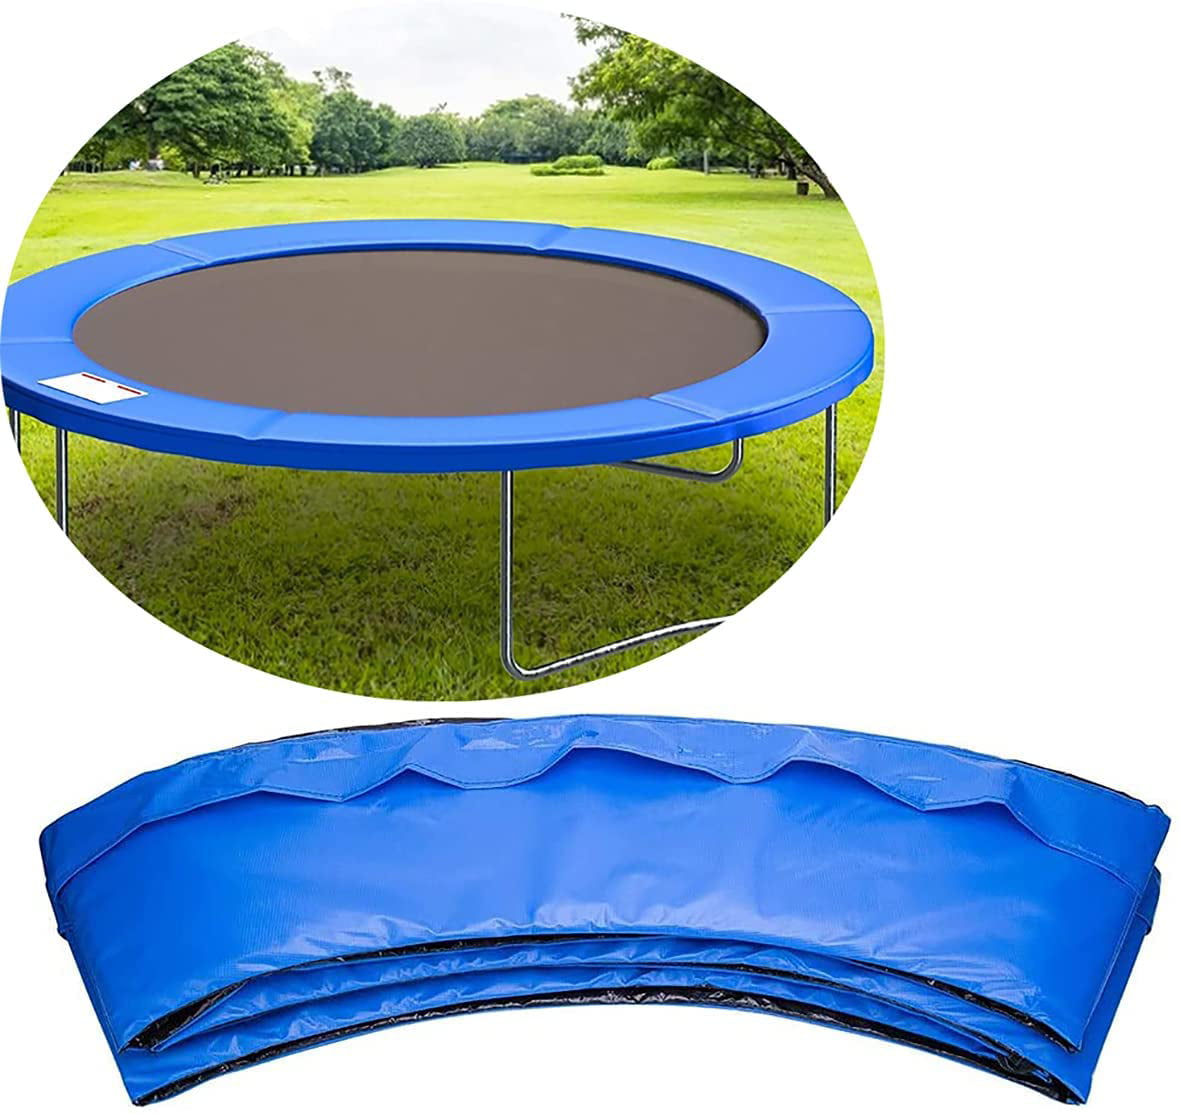 ZYR Replacement Trampoline Surround Pads Extra Thick Foam Safety Spring Cover Mat Padding,for Outdoor Garden,10ft 